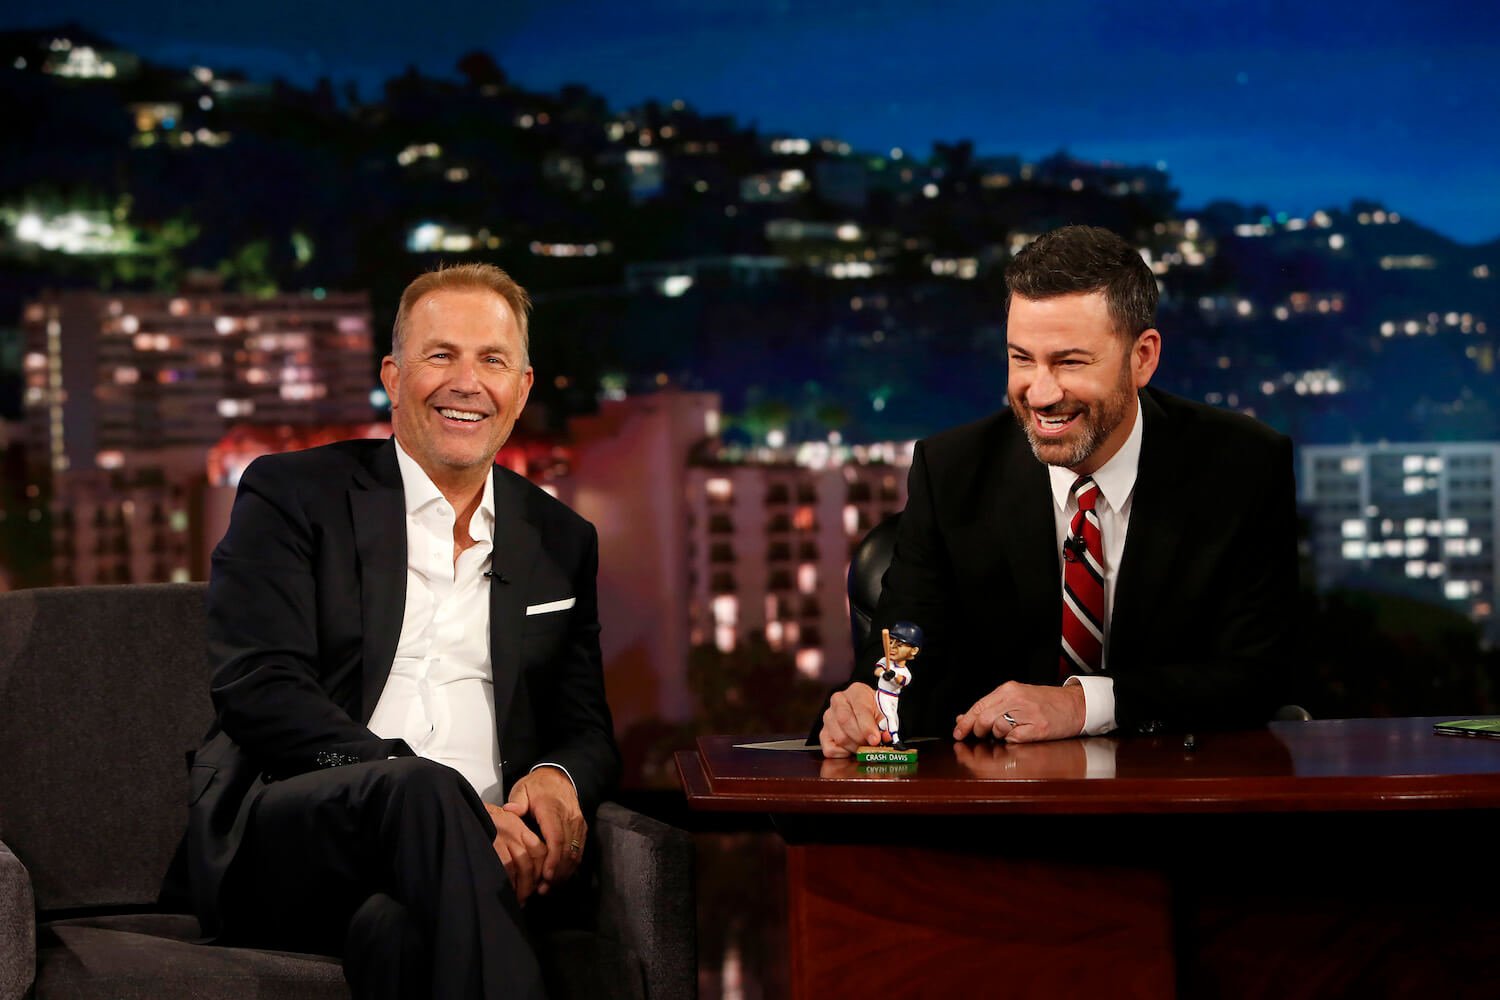 Kevin Costner from 'Yellowstone' Season 5 sitting next to Jimmy Kimmel on stage